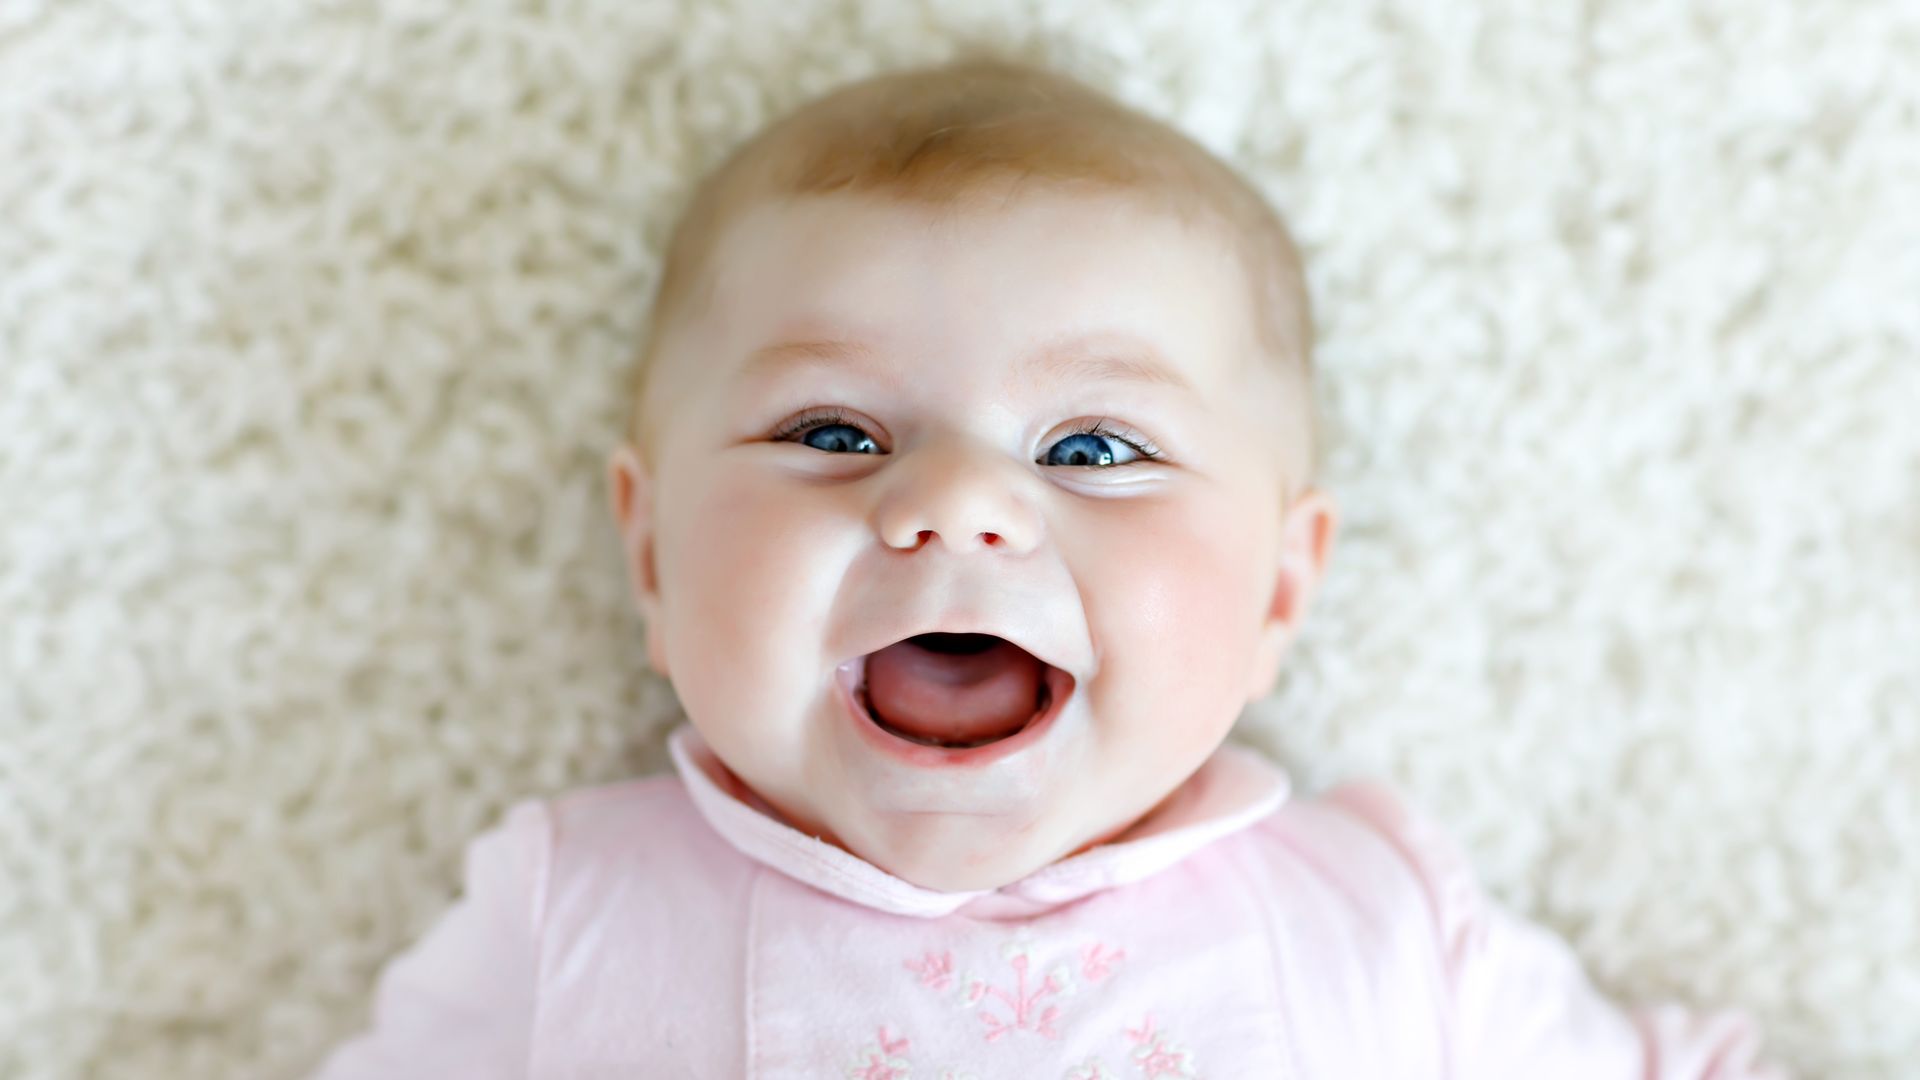 Close-up of a two or three months old baby girl with blue eyes